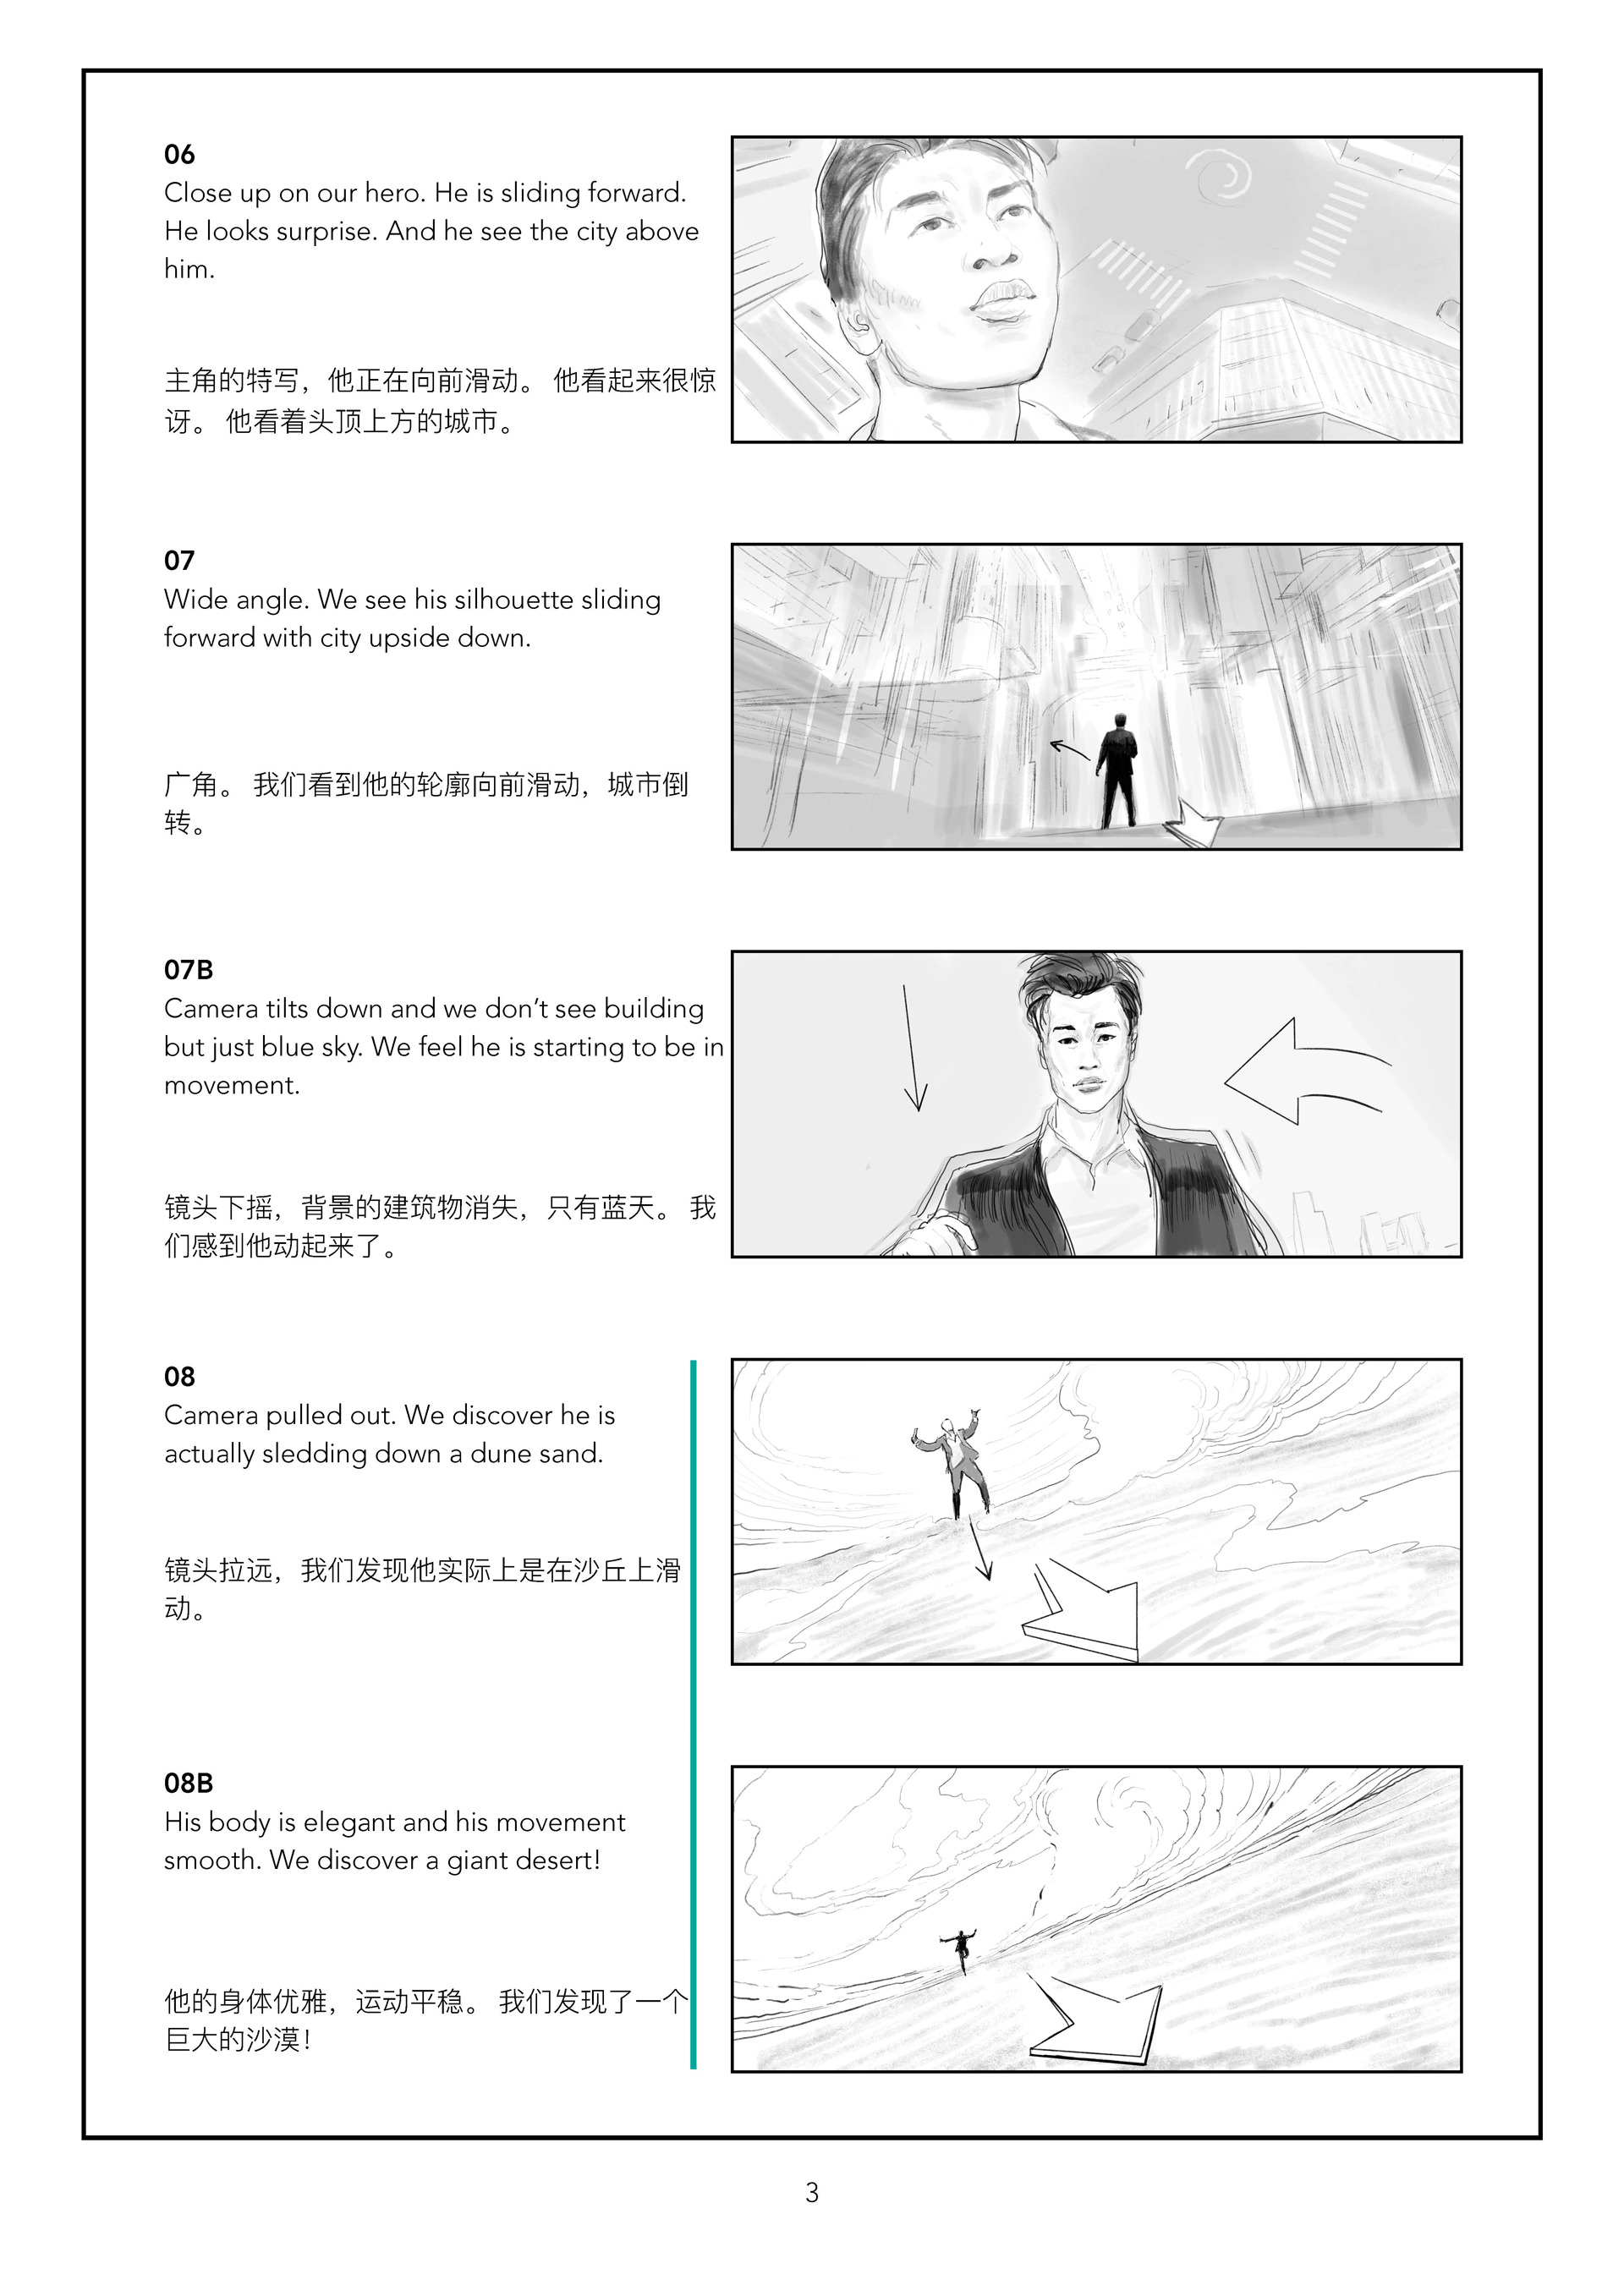 Oppo Compass storyboard 02